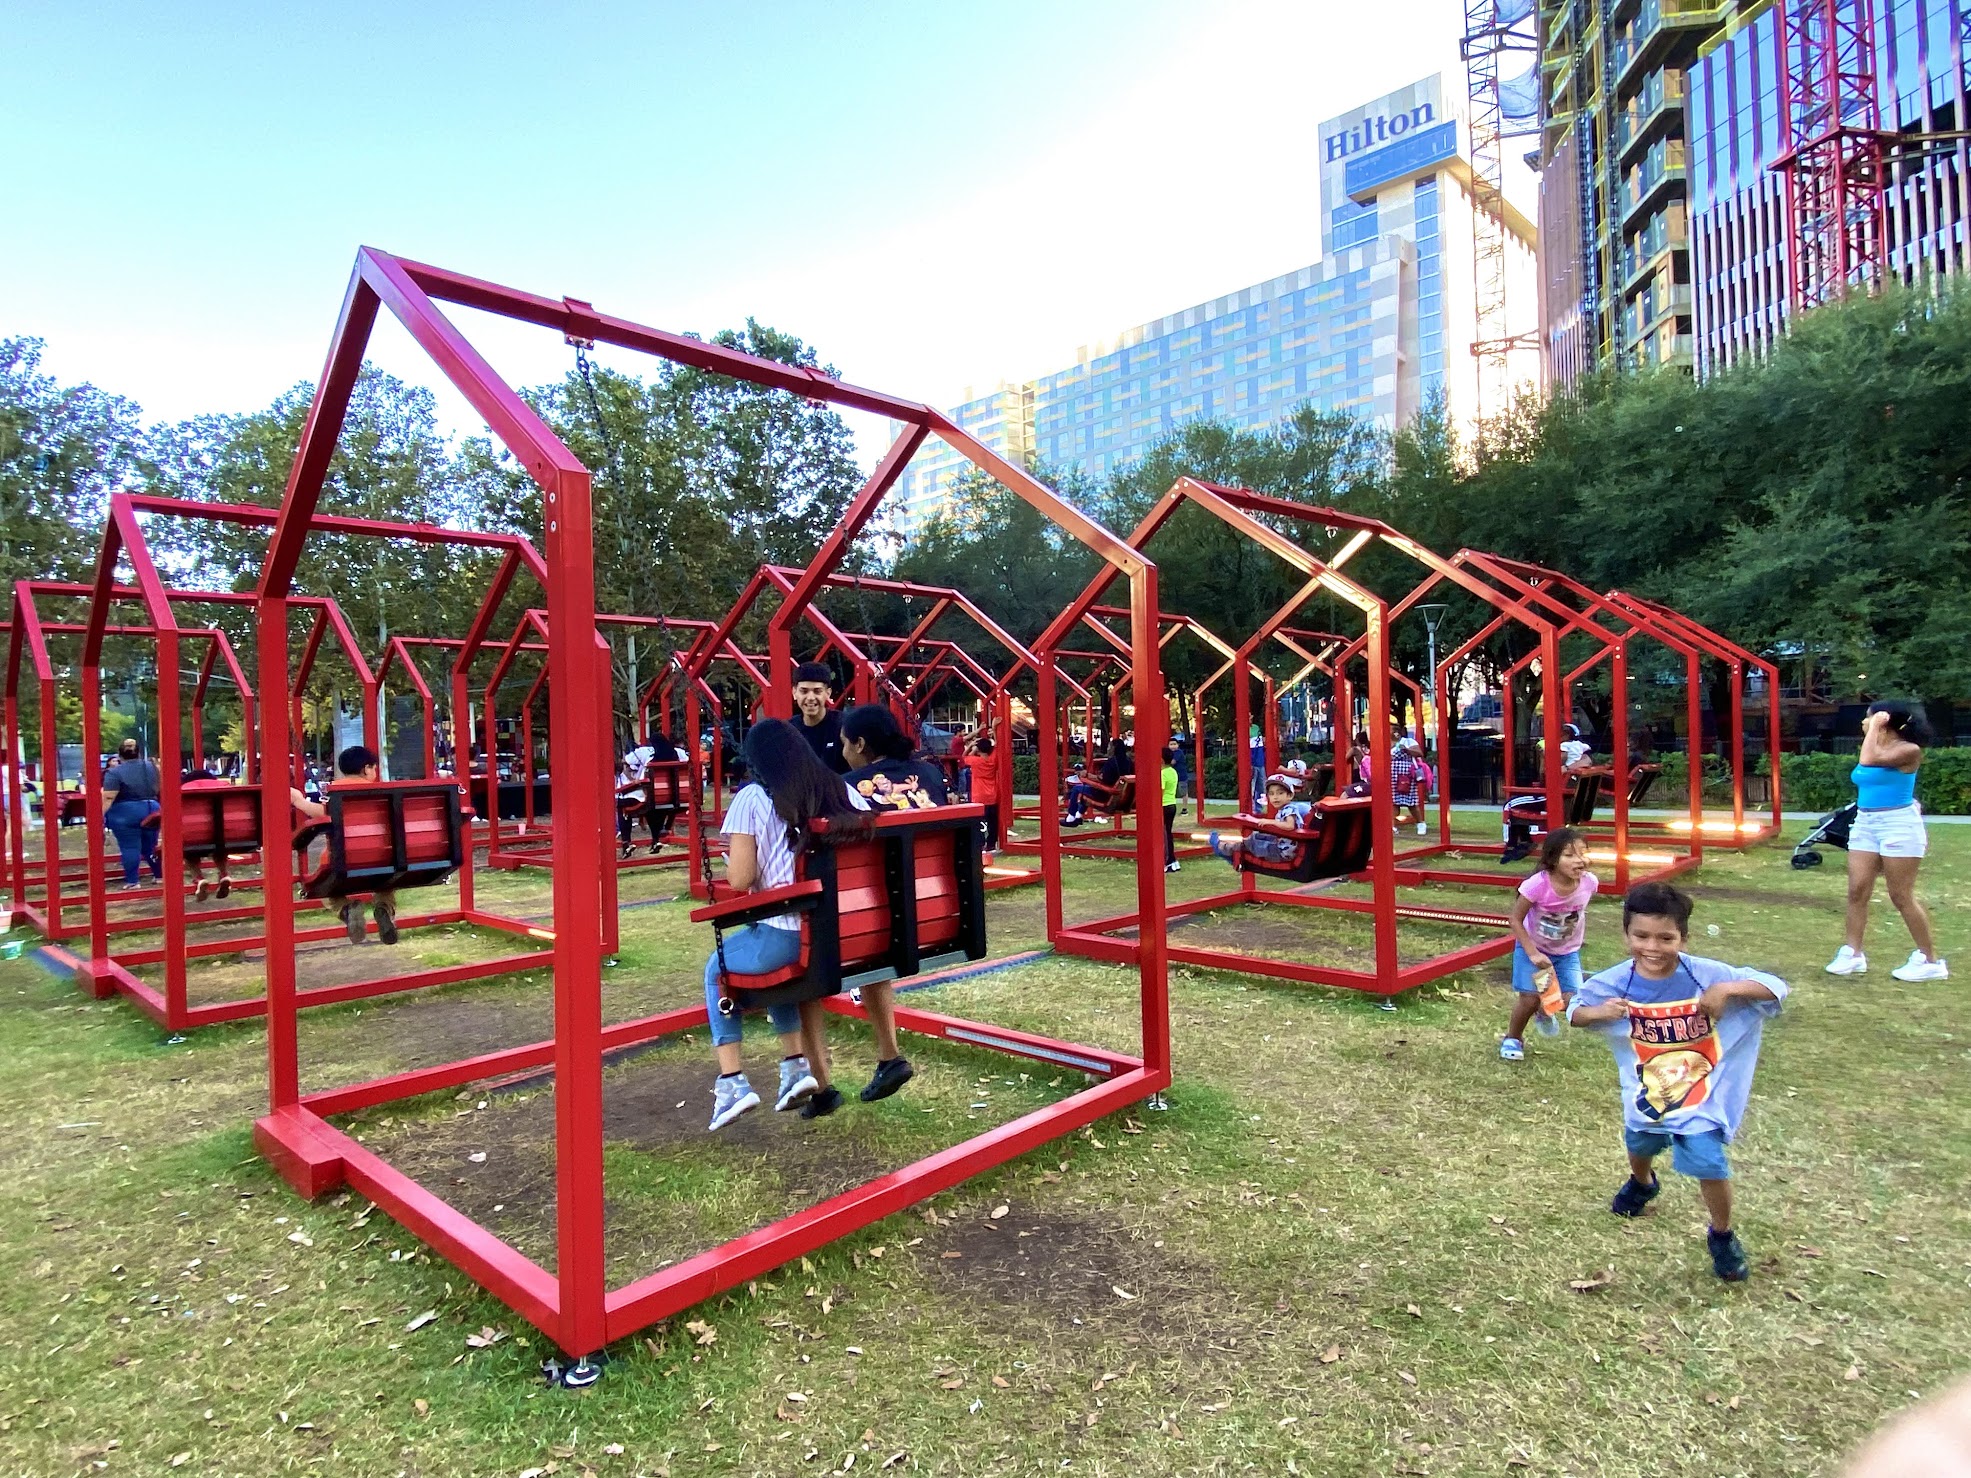 Making Memories: Free Things to Do in Houston Today with Family